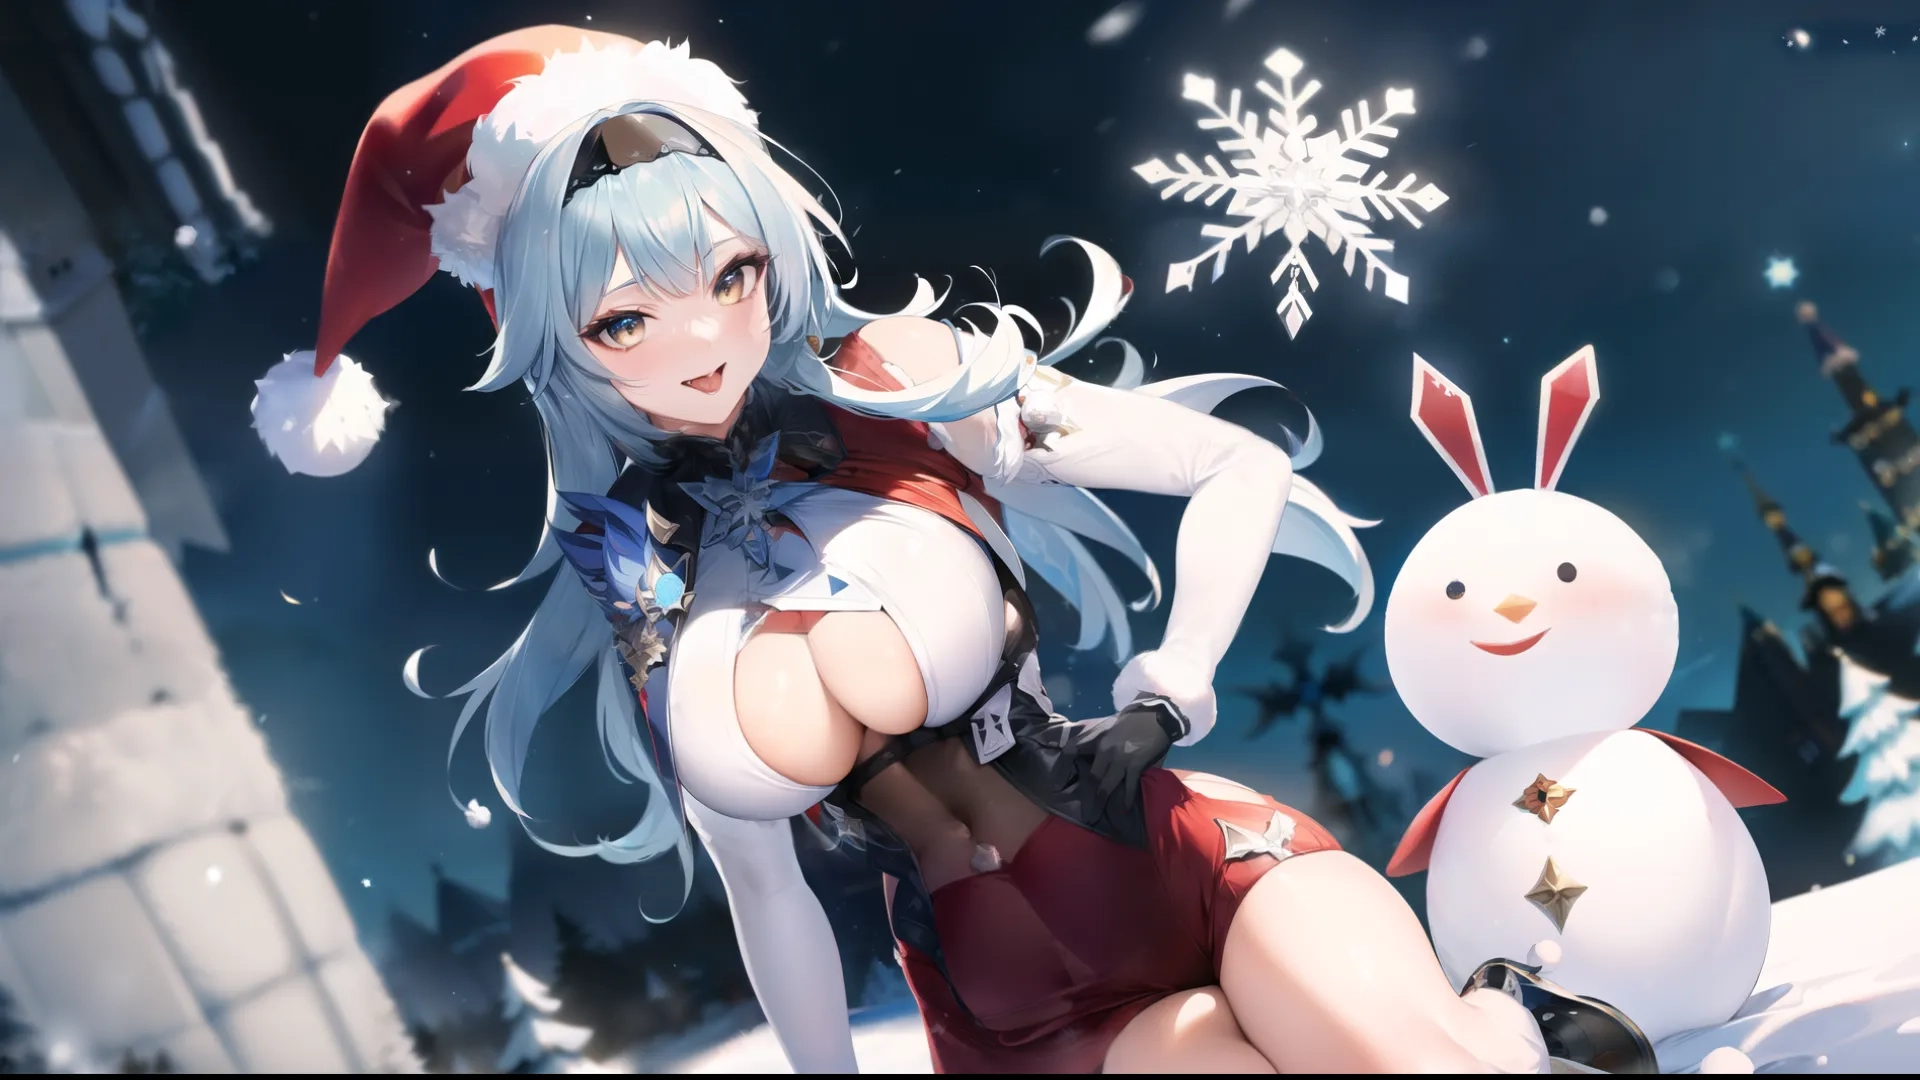 a sexy snow - covered girl holding onto a large snowman in front of her face, in a winter scene with trees and reindeer statues in the background
